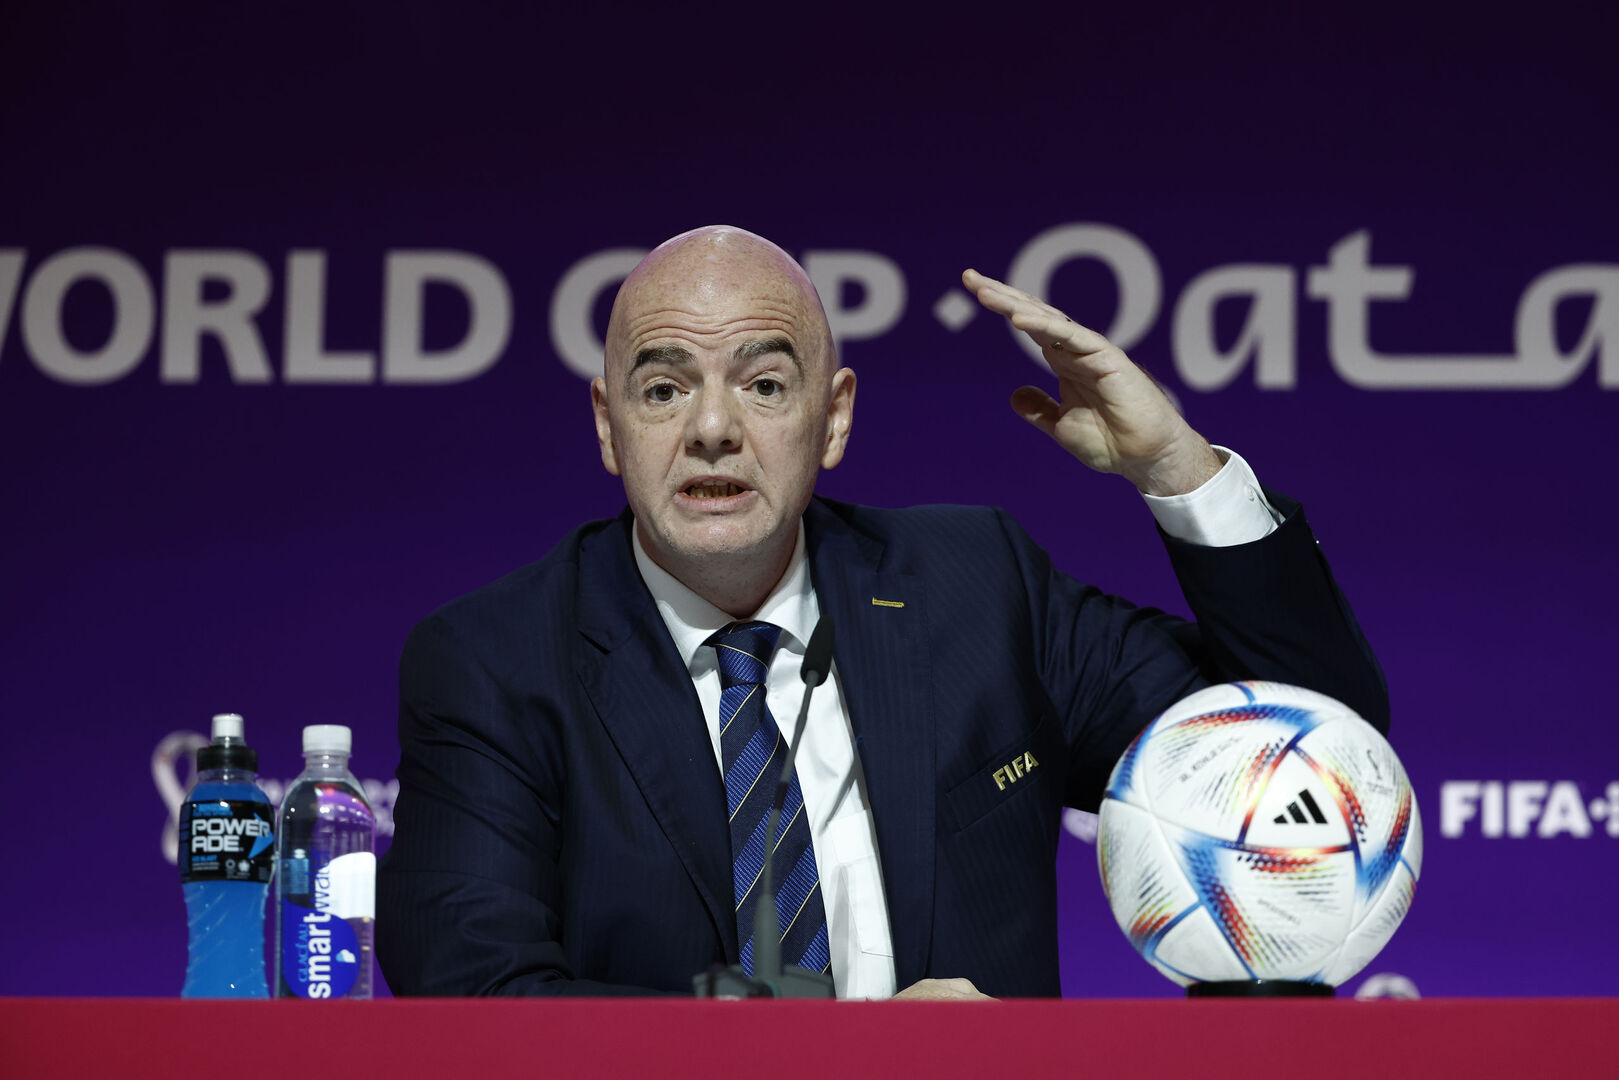 What do Arsenal fans think about the FIFA boss’ speech clearly ‘sportswashing’?